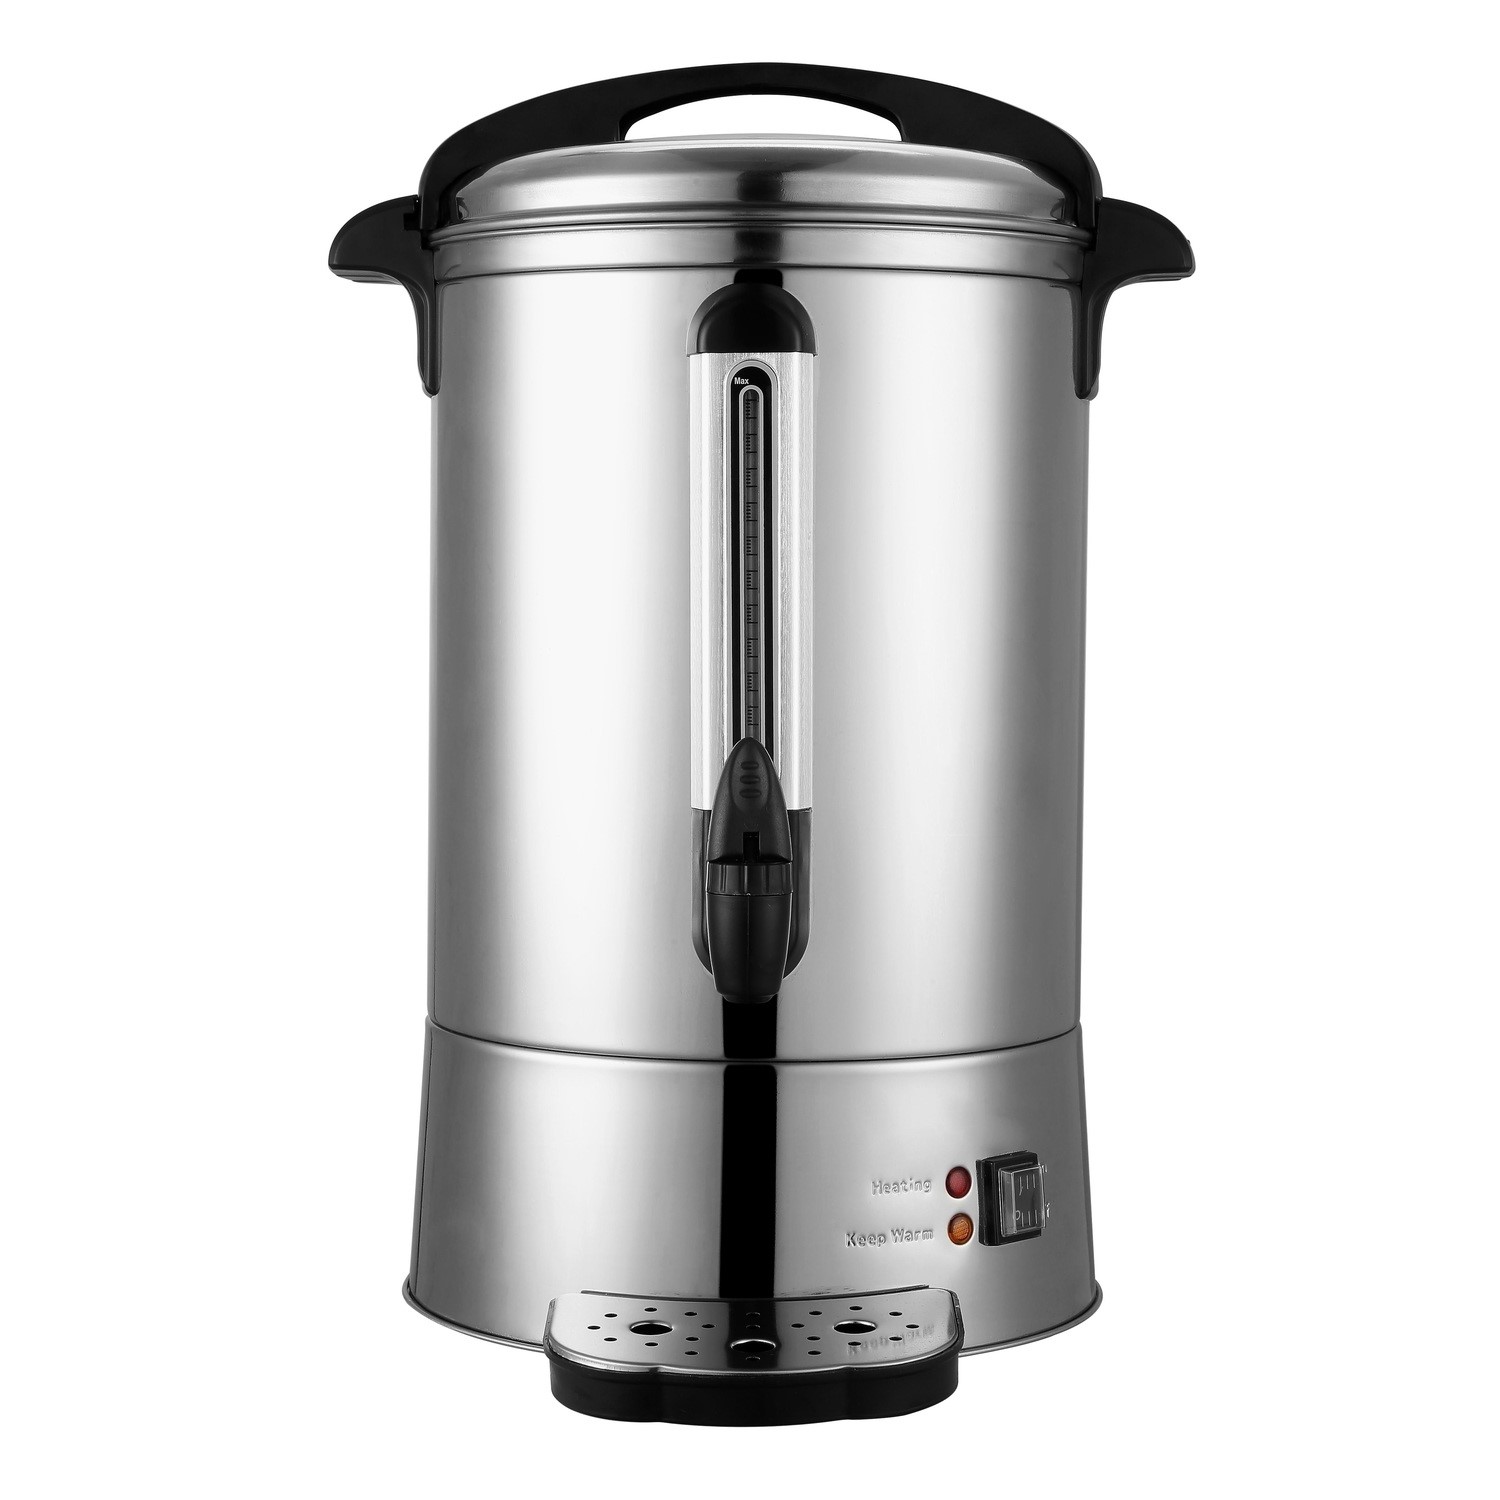 20L Hot Water Urn in Stainless Steel - Tea, Coffee, Boiling Water